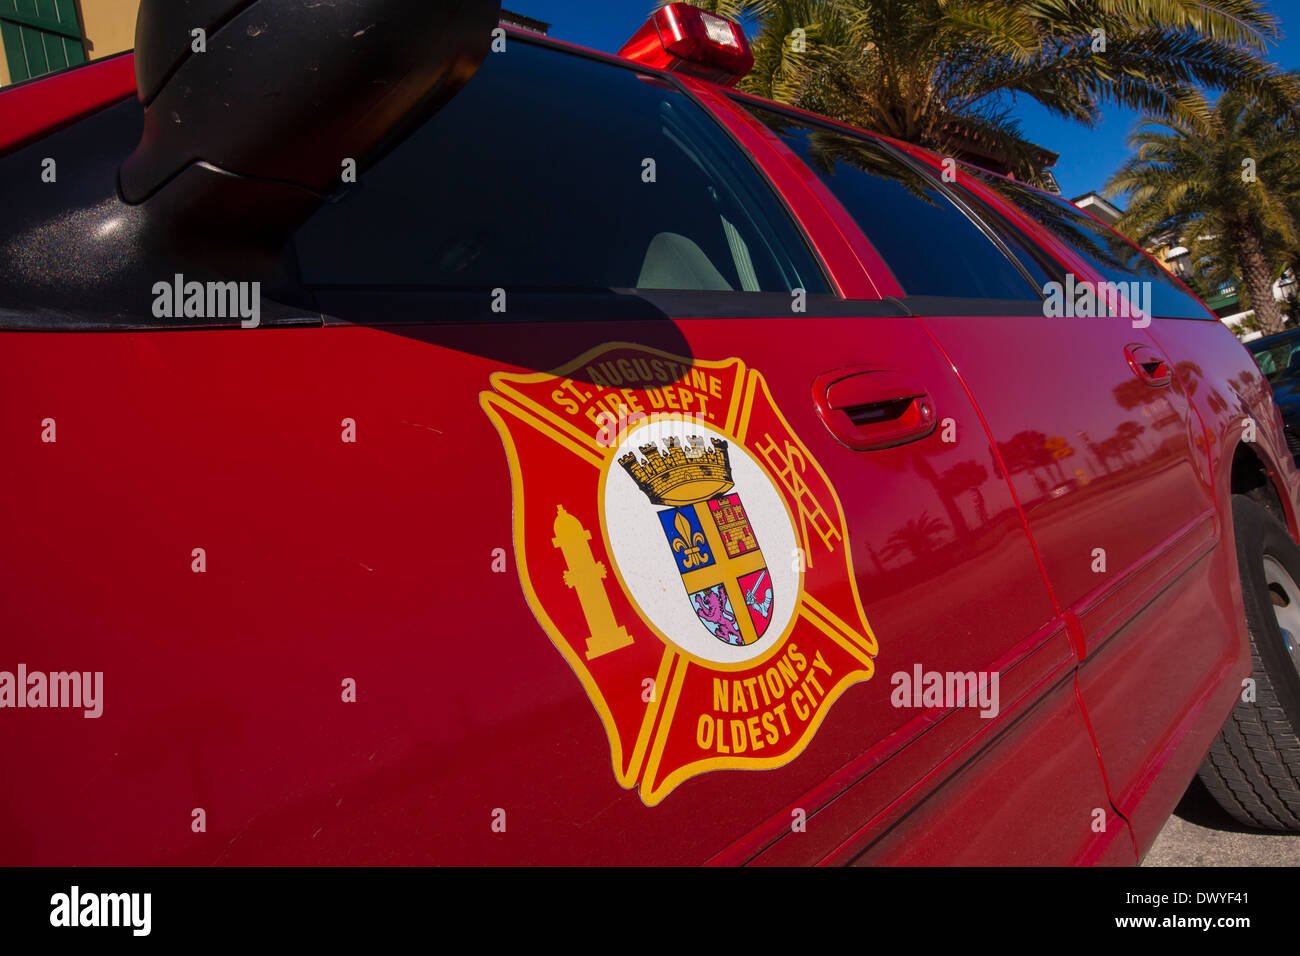 St. Augustine Fire department logo is pictured on a car in St. Augustine, Florida Stock Photo